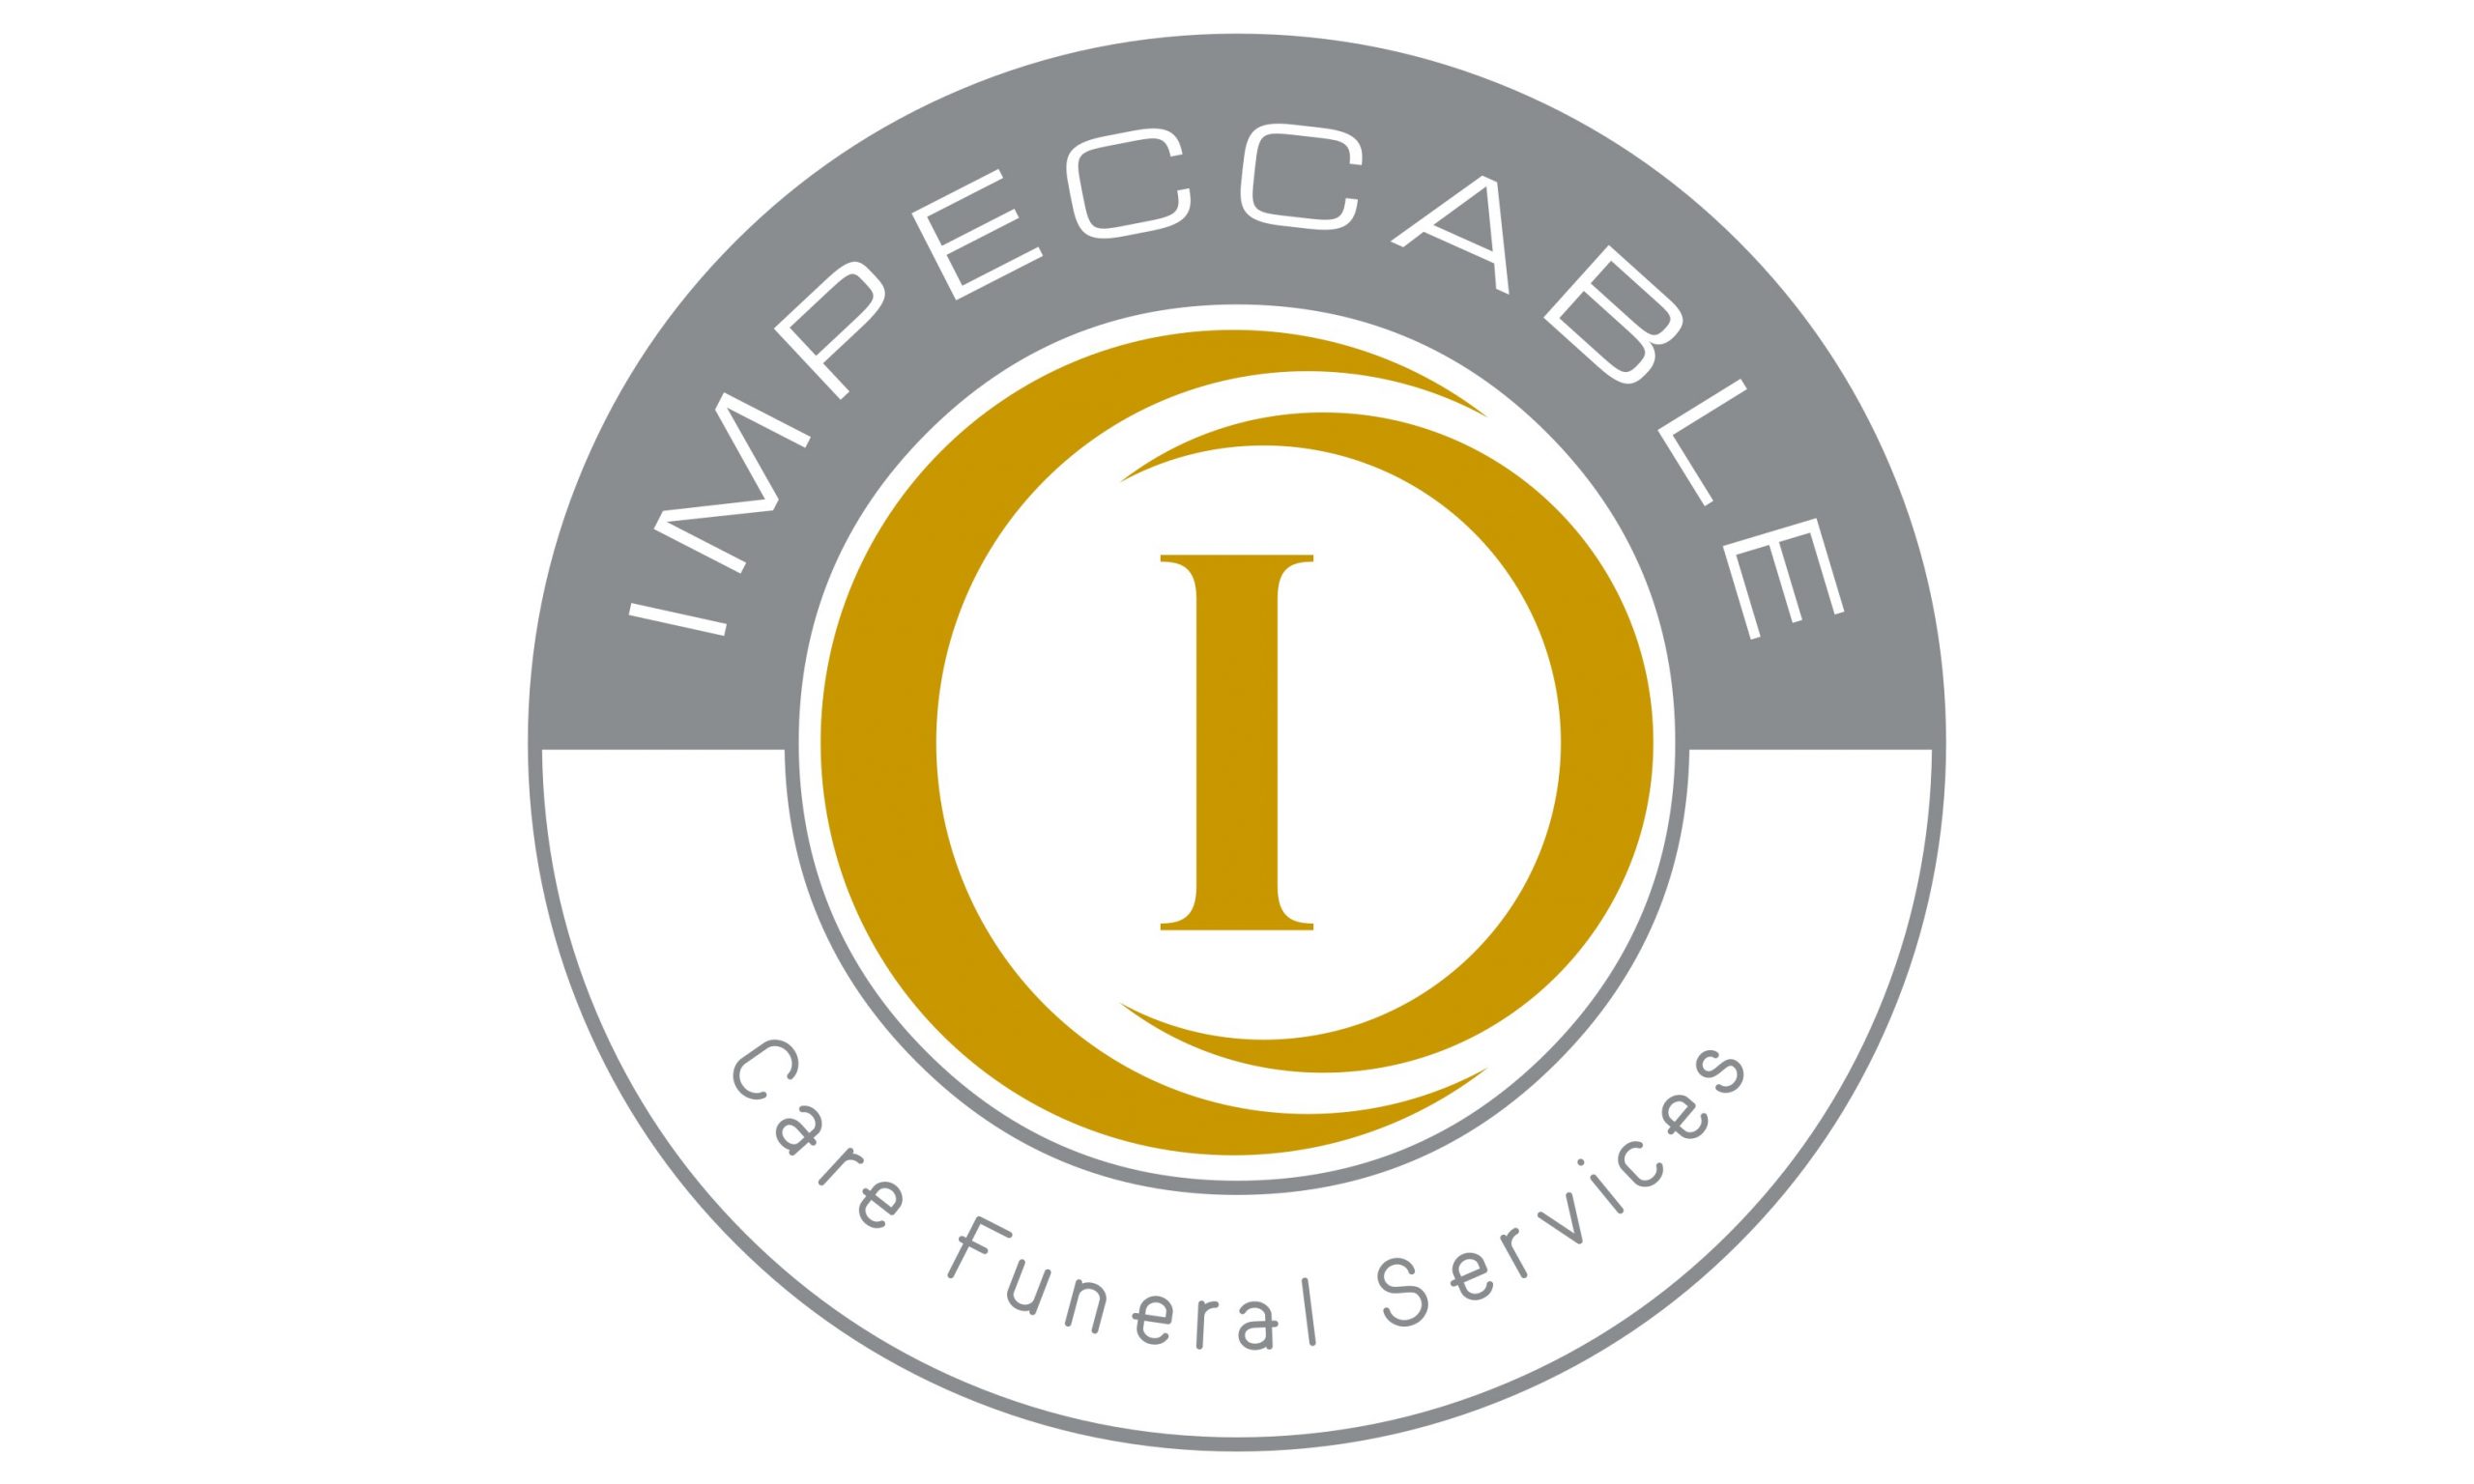 Impeccable Funeral Services